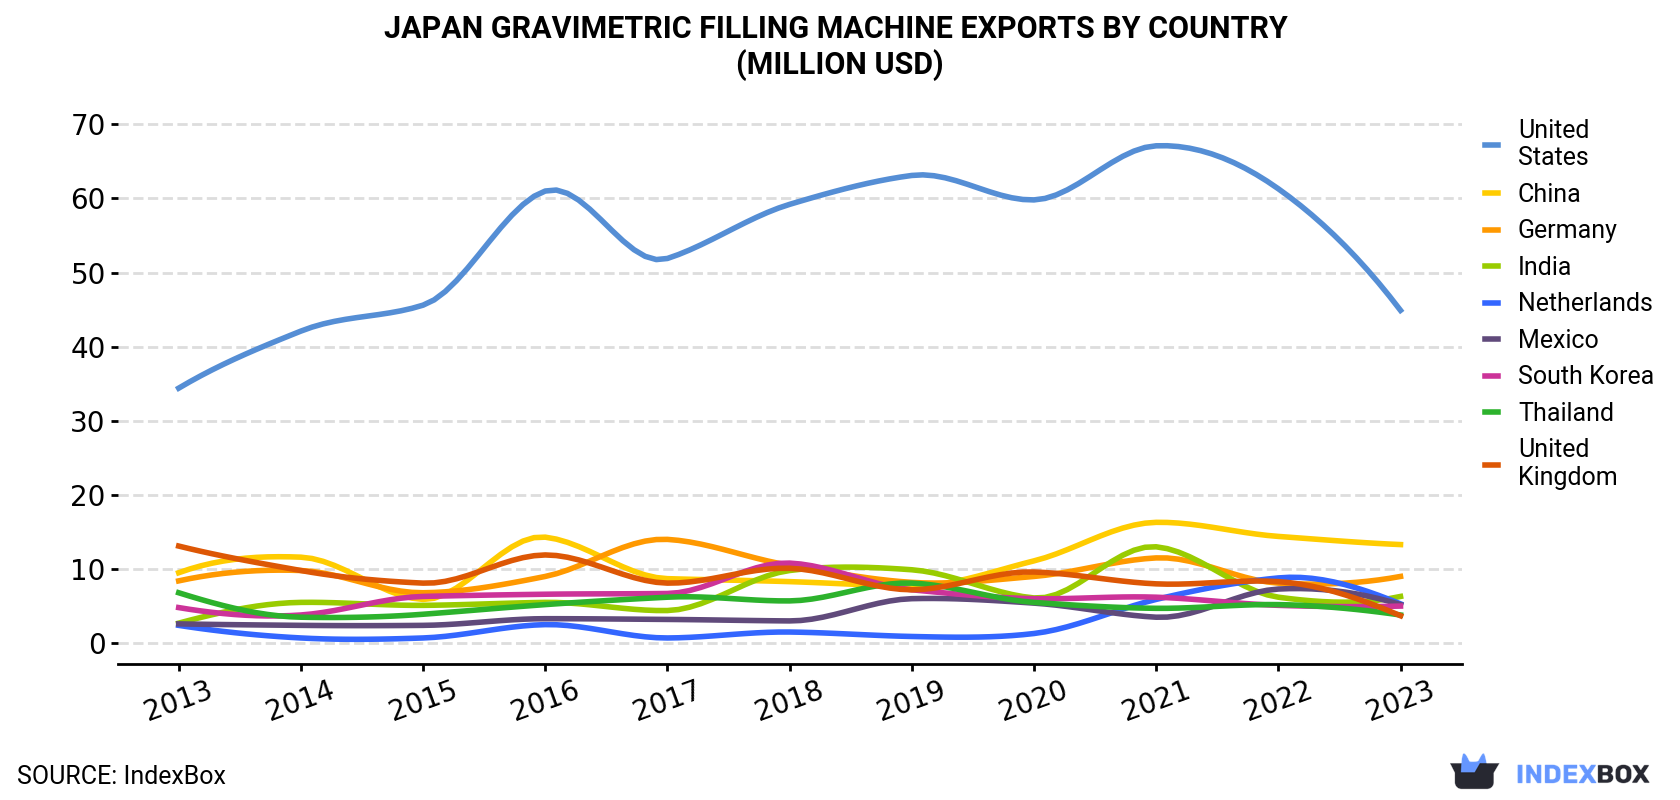 Japan Gravimetric Filling Machine Exports By Country (Million USD)